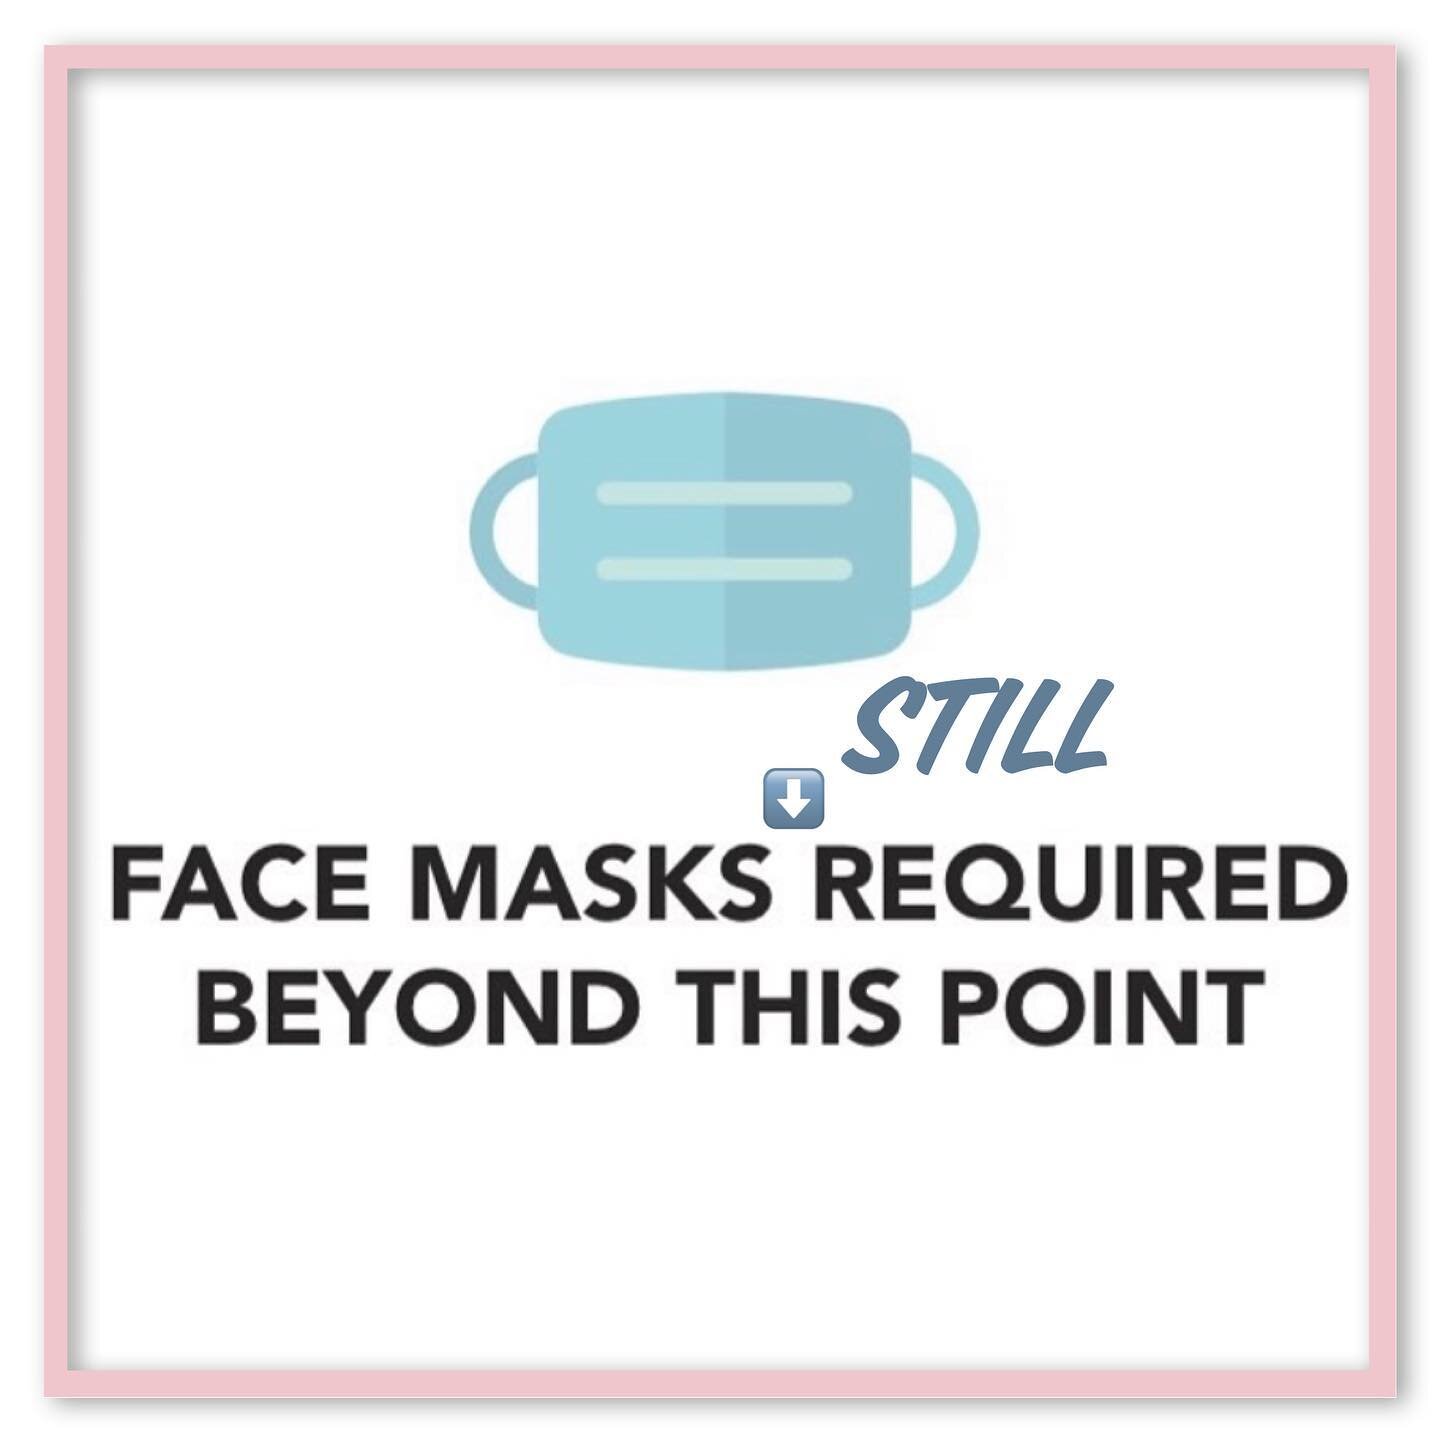 In an effort to make sure all of our clients feel safe and comfortable, we are still asking that you wear your mask until your service starts and put it back on once it is finished. 
We also still ask that you wait to come in until your scheduled app